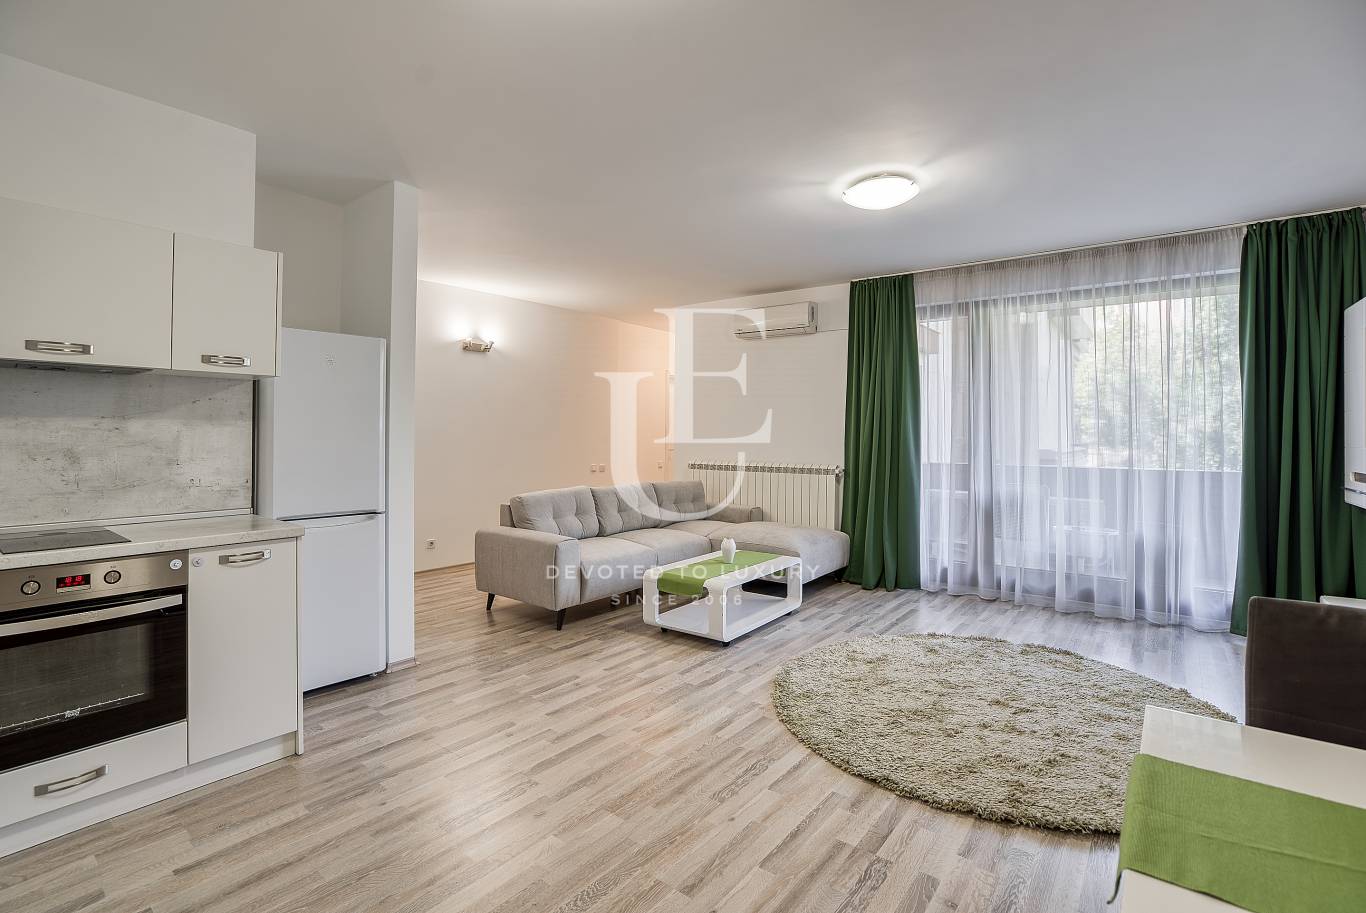 Apartment for rent in Sofia, Manastirski livadi - East with listing ID: N18057 - image 1